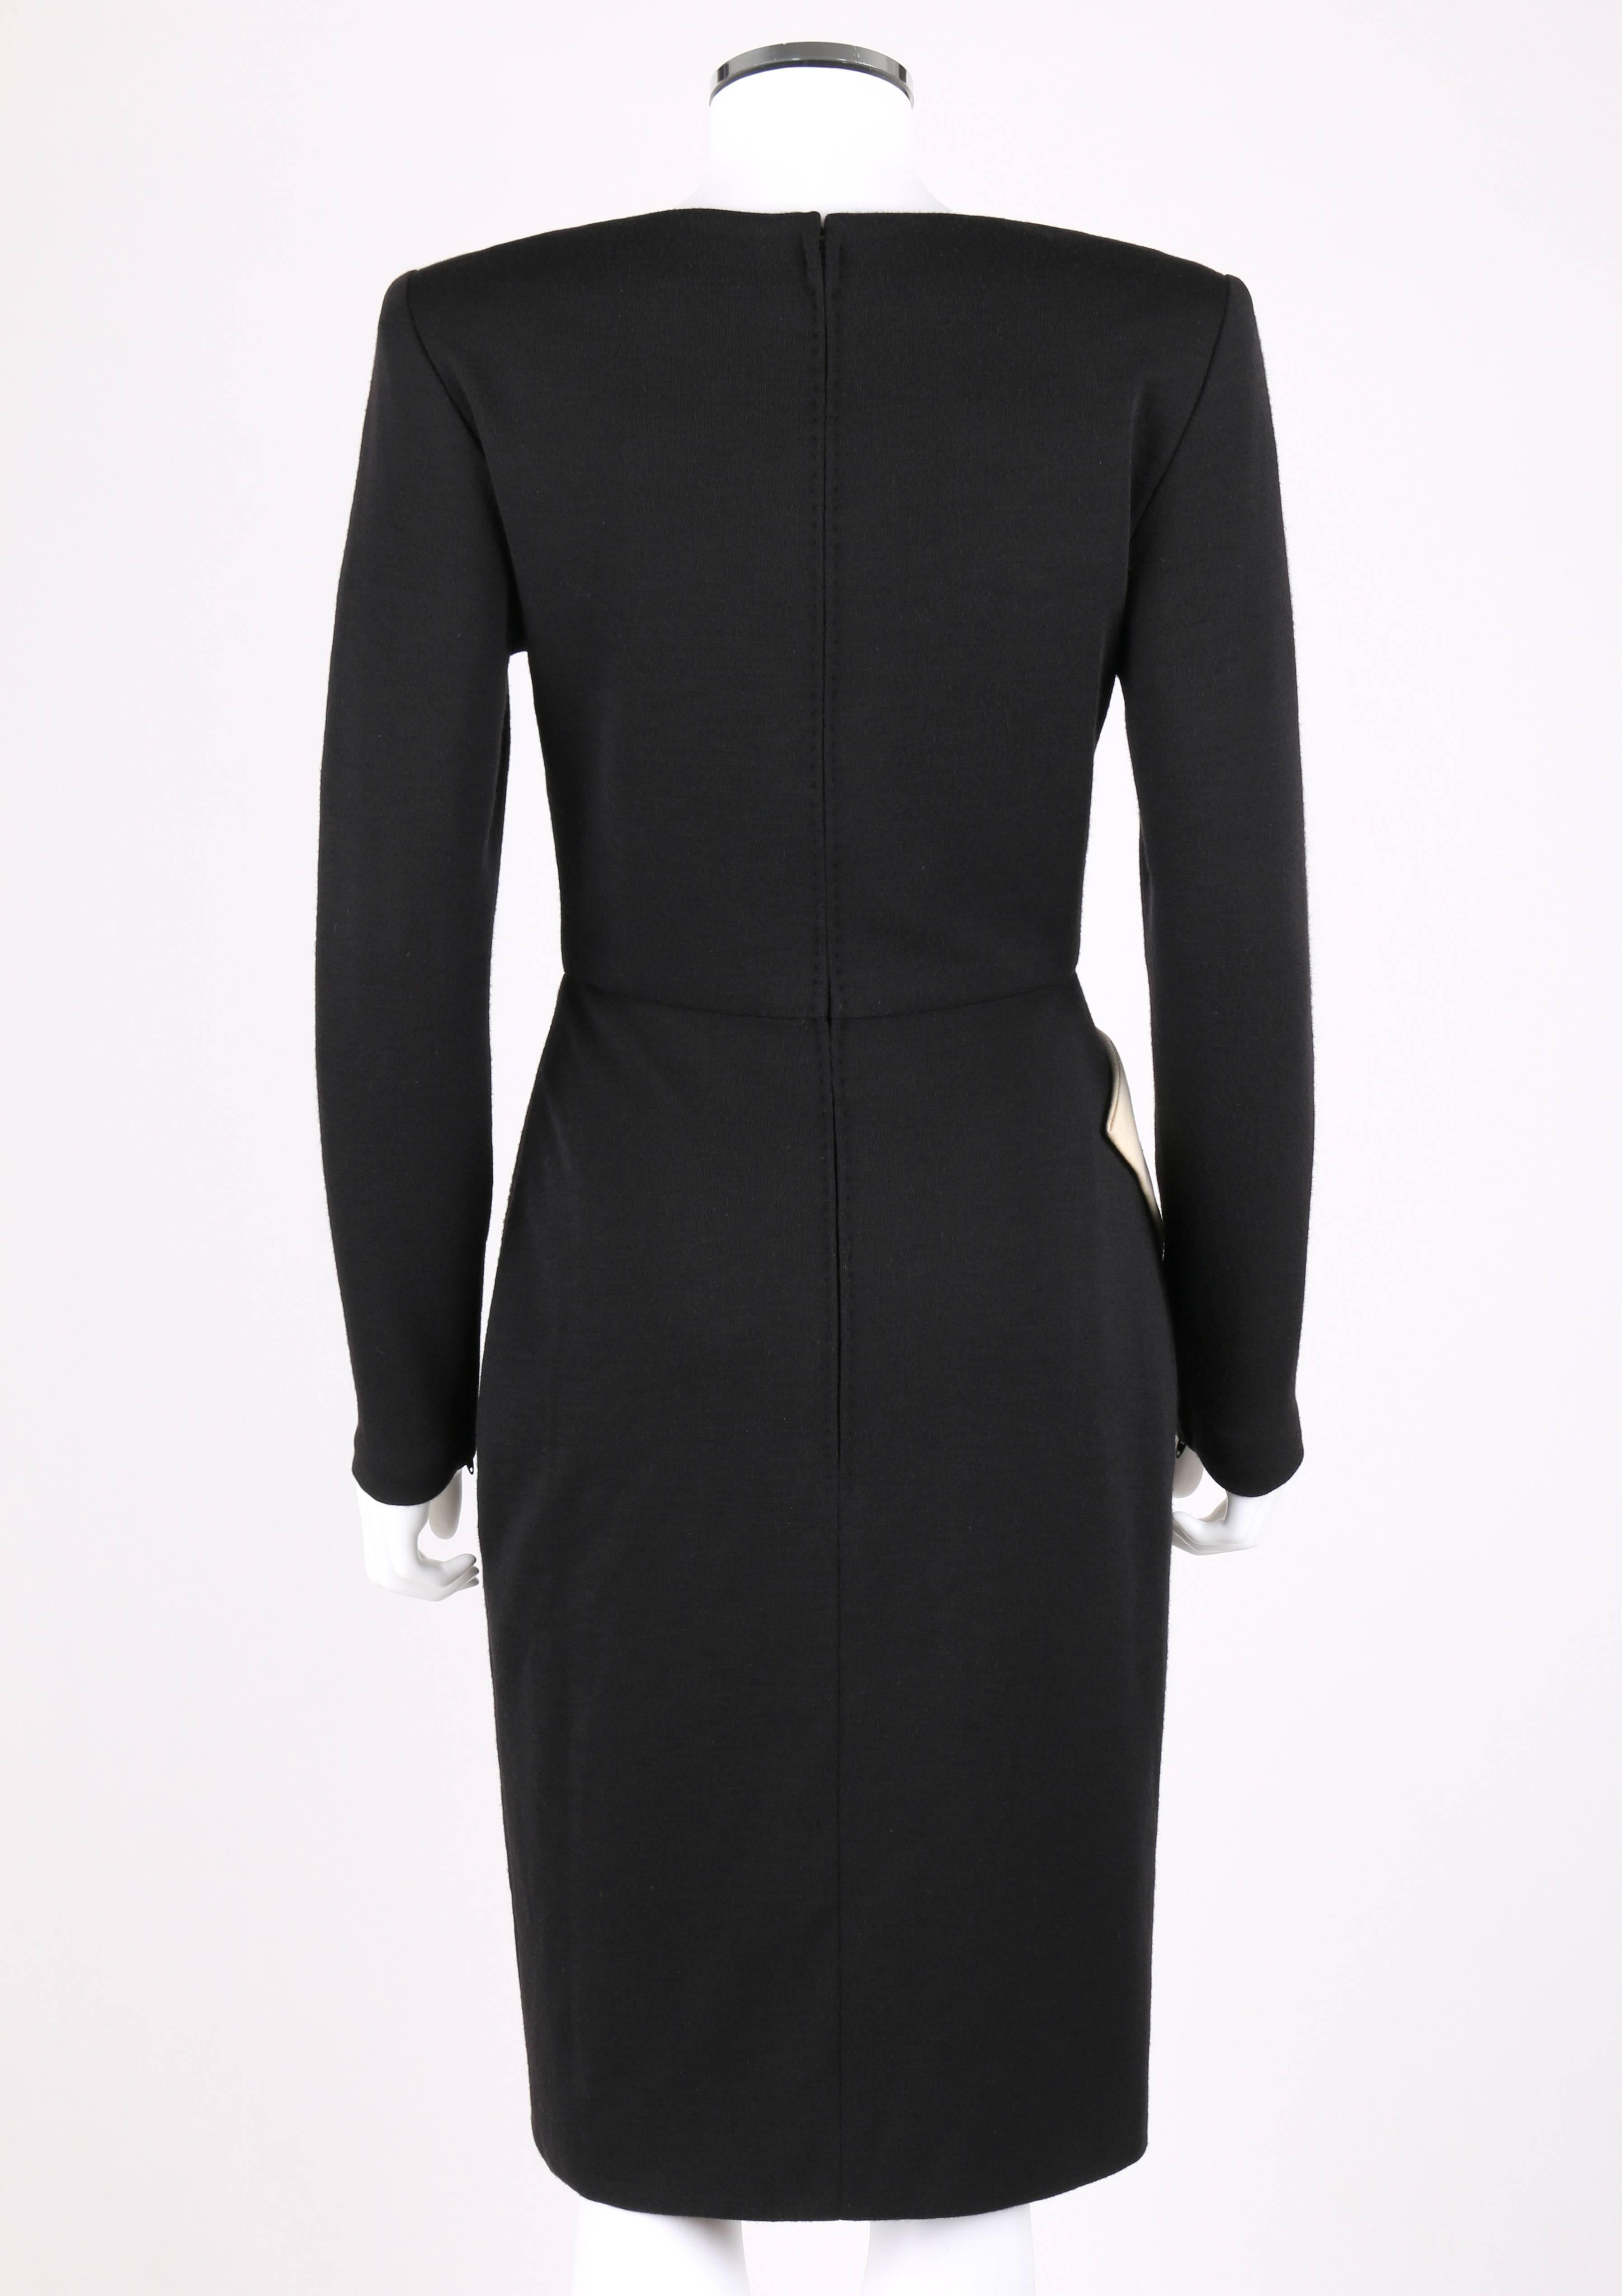 GALANOS c.1980's Black Ivory Avant Garde Zig Zag Panel Wool Knit Cocktail Dress In Good Condition For Sale In Thiensville, WI